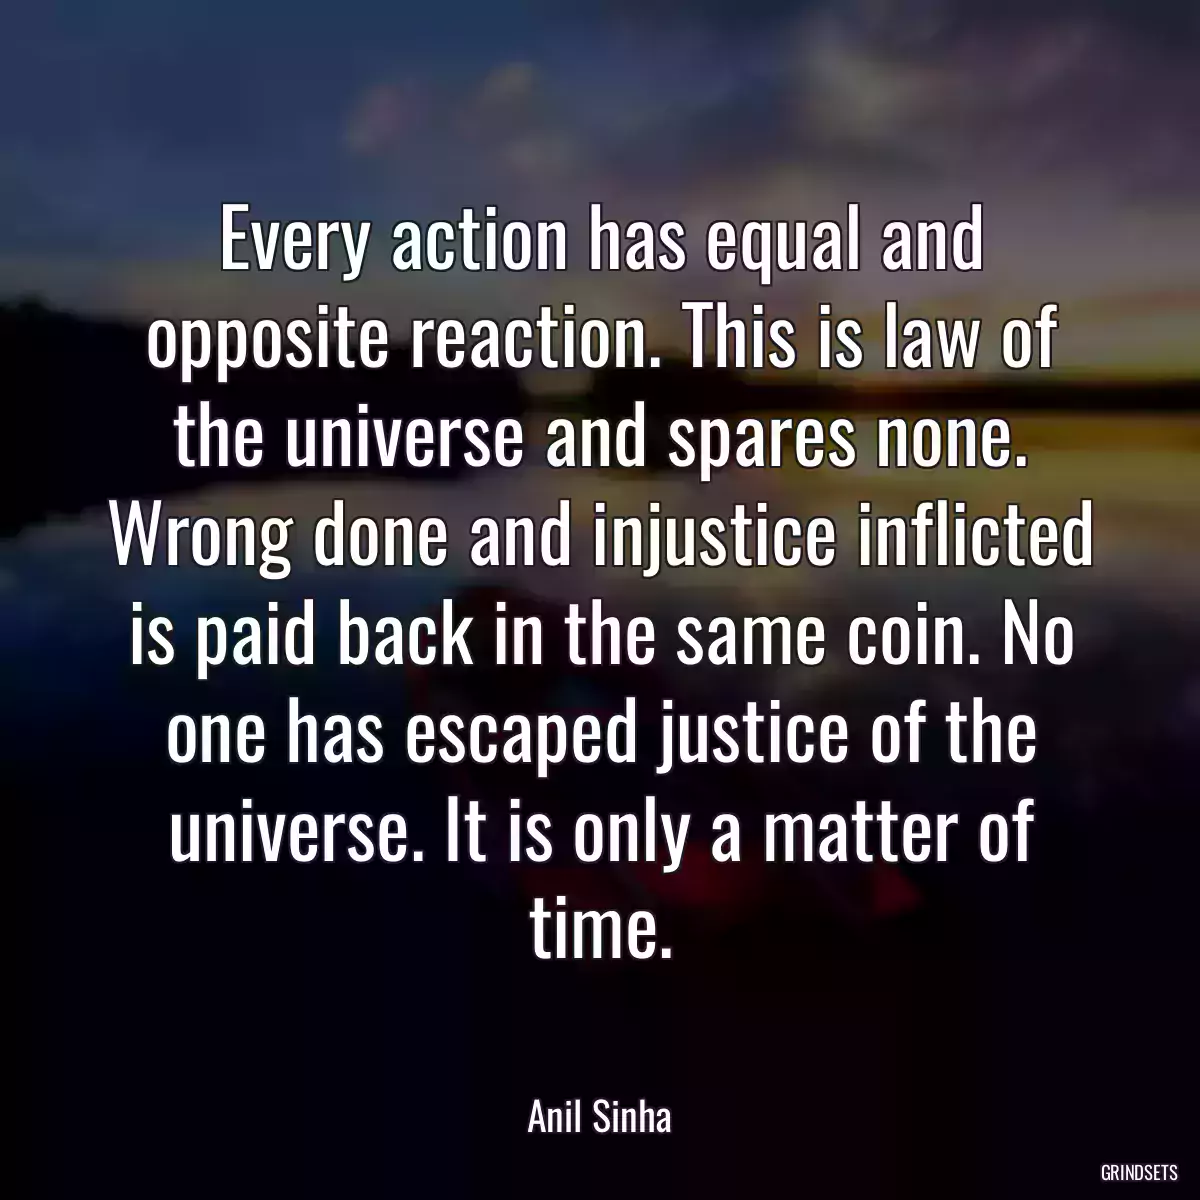 Every action has equal and opposite reaction. This is law of the universe and spares none. Wrong done and injustice inflicted is paid back in the same coin. No one has escaped justice of the universe. It is only a matter of time.